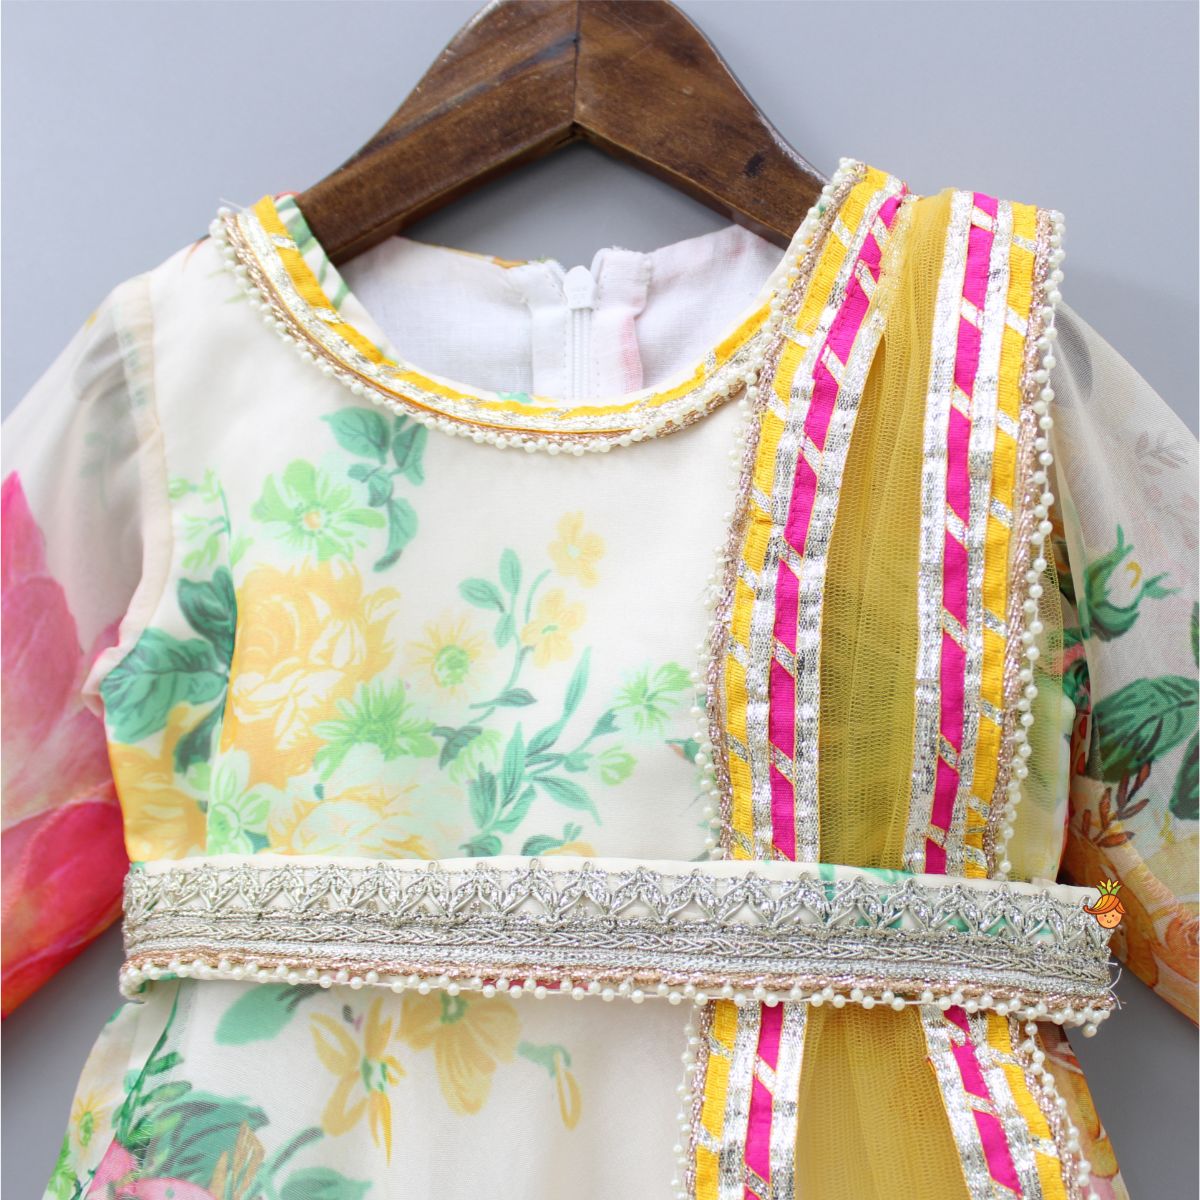 Adorable Blooming Flowers Printed Asymmetric Ruffle Hem Anarkali With Pearls Lace Detail Attached Dupatta